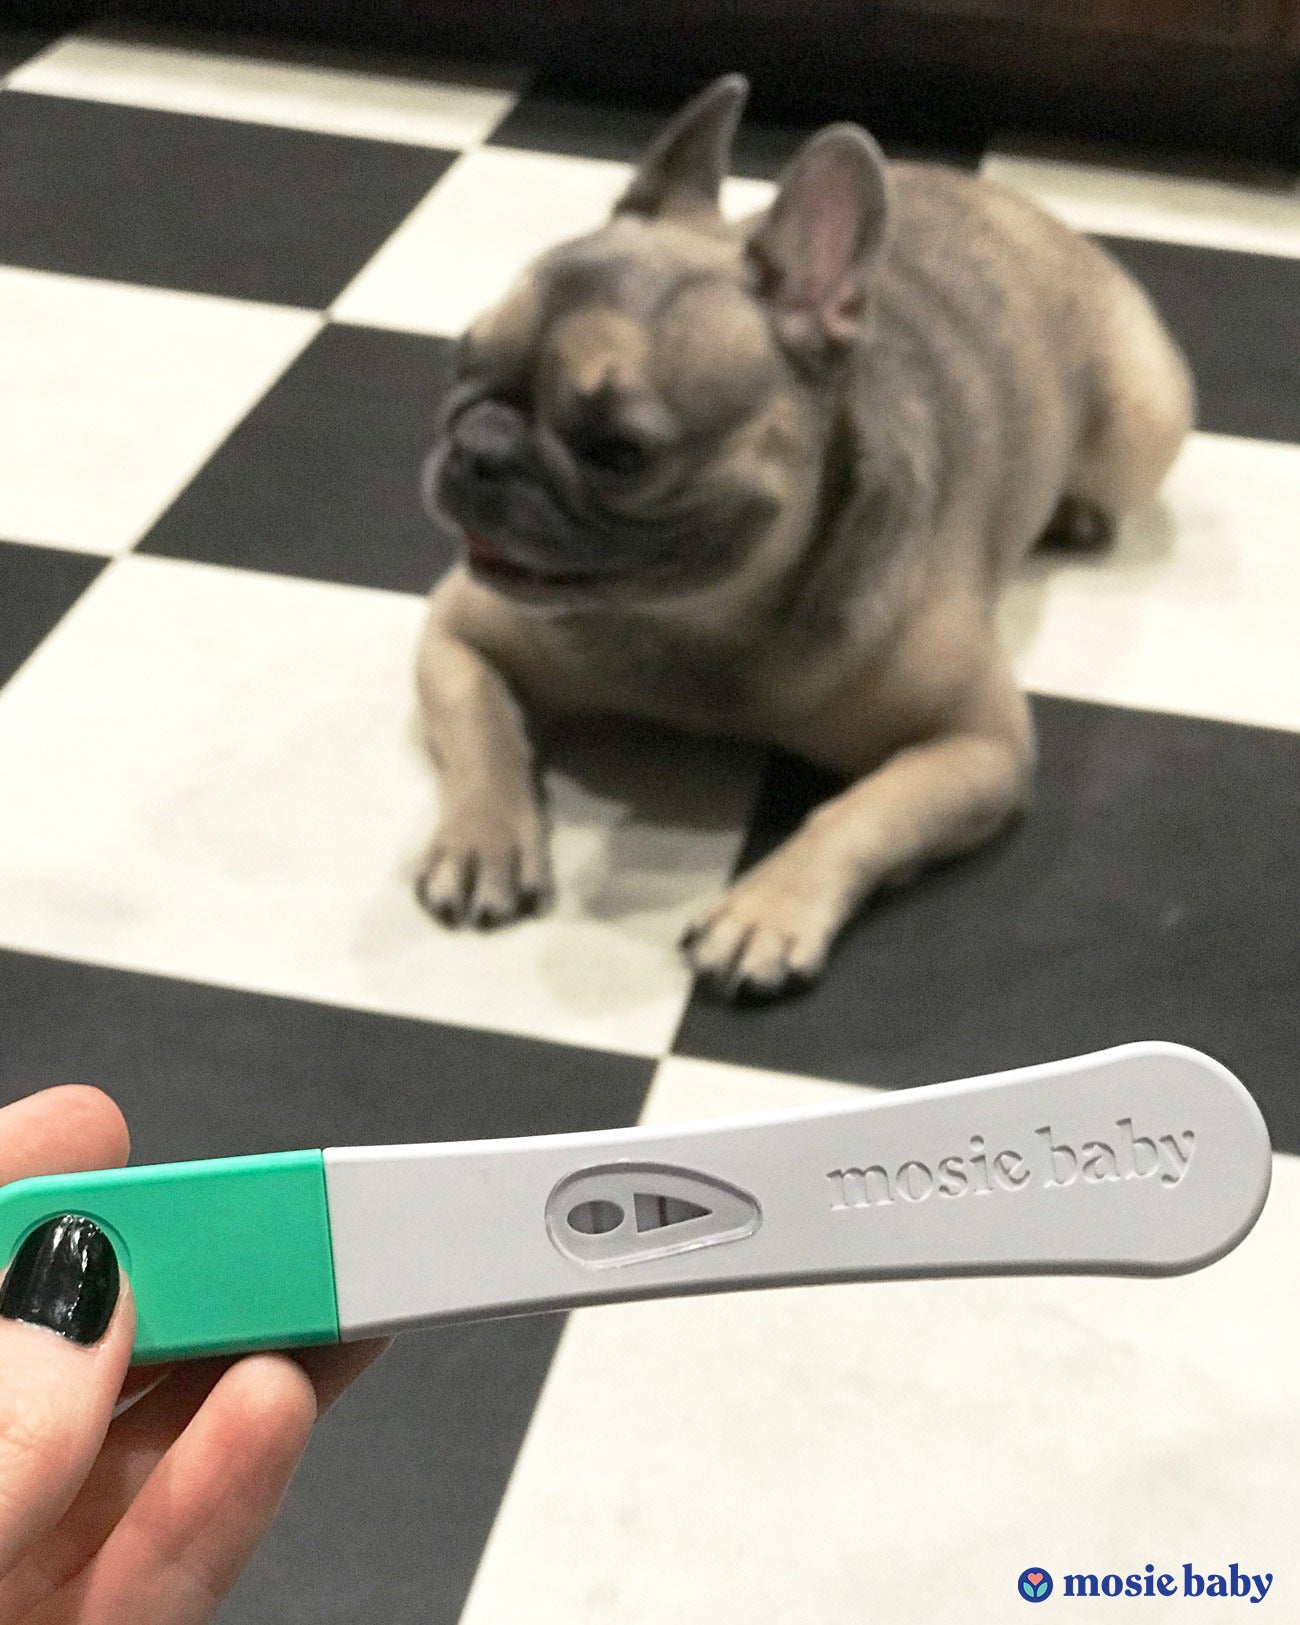 positive mosie baby pregnancy test with dog